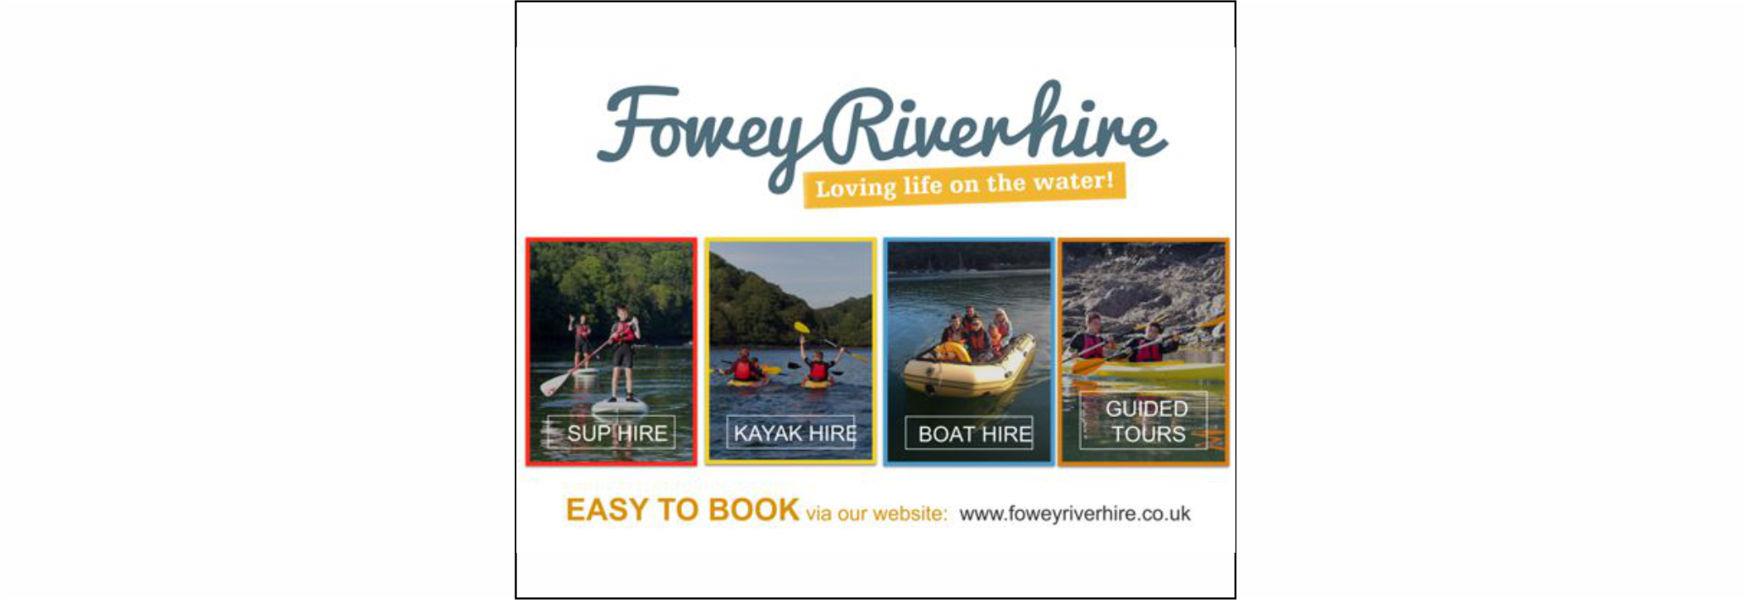 Fowey River Hire - Loving Life on the Water - Easy to book via our website - www.foweyriverhire.co.uk